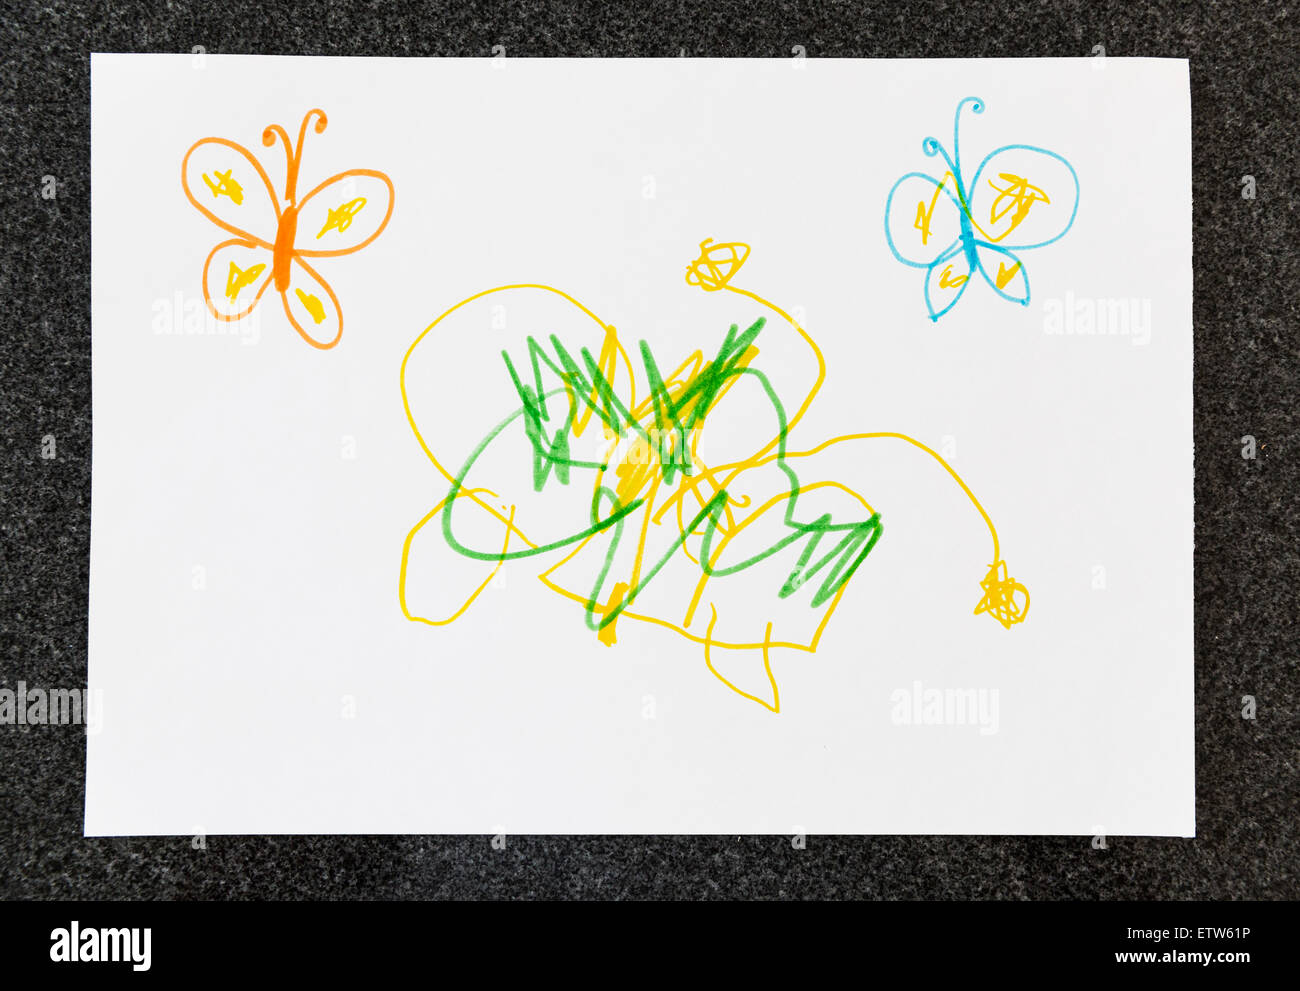 Child's drawing of butterflies on paper Stock Photo